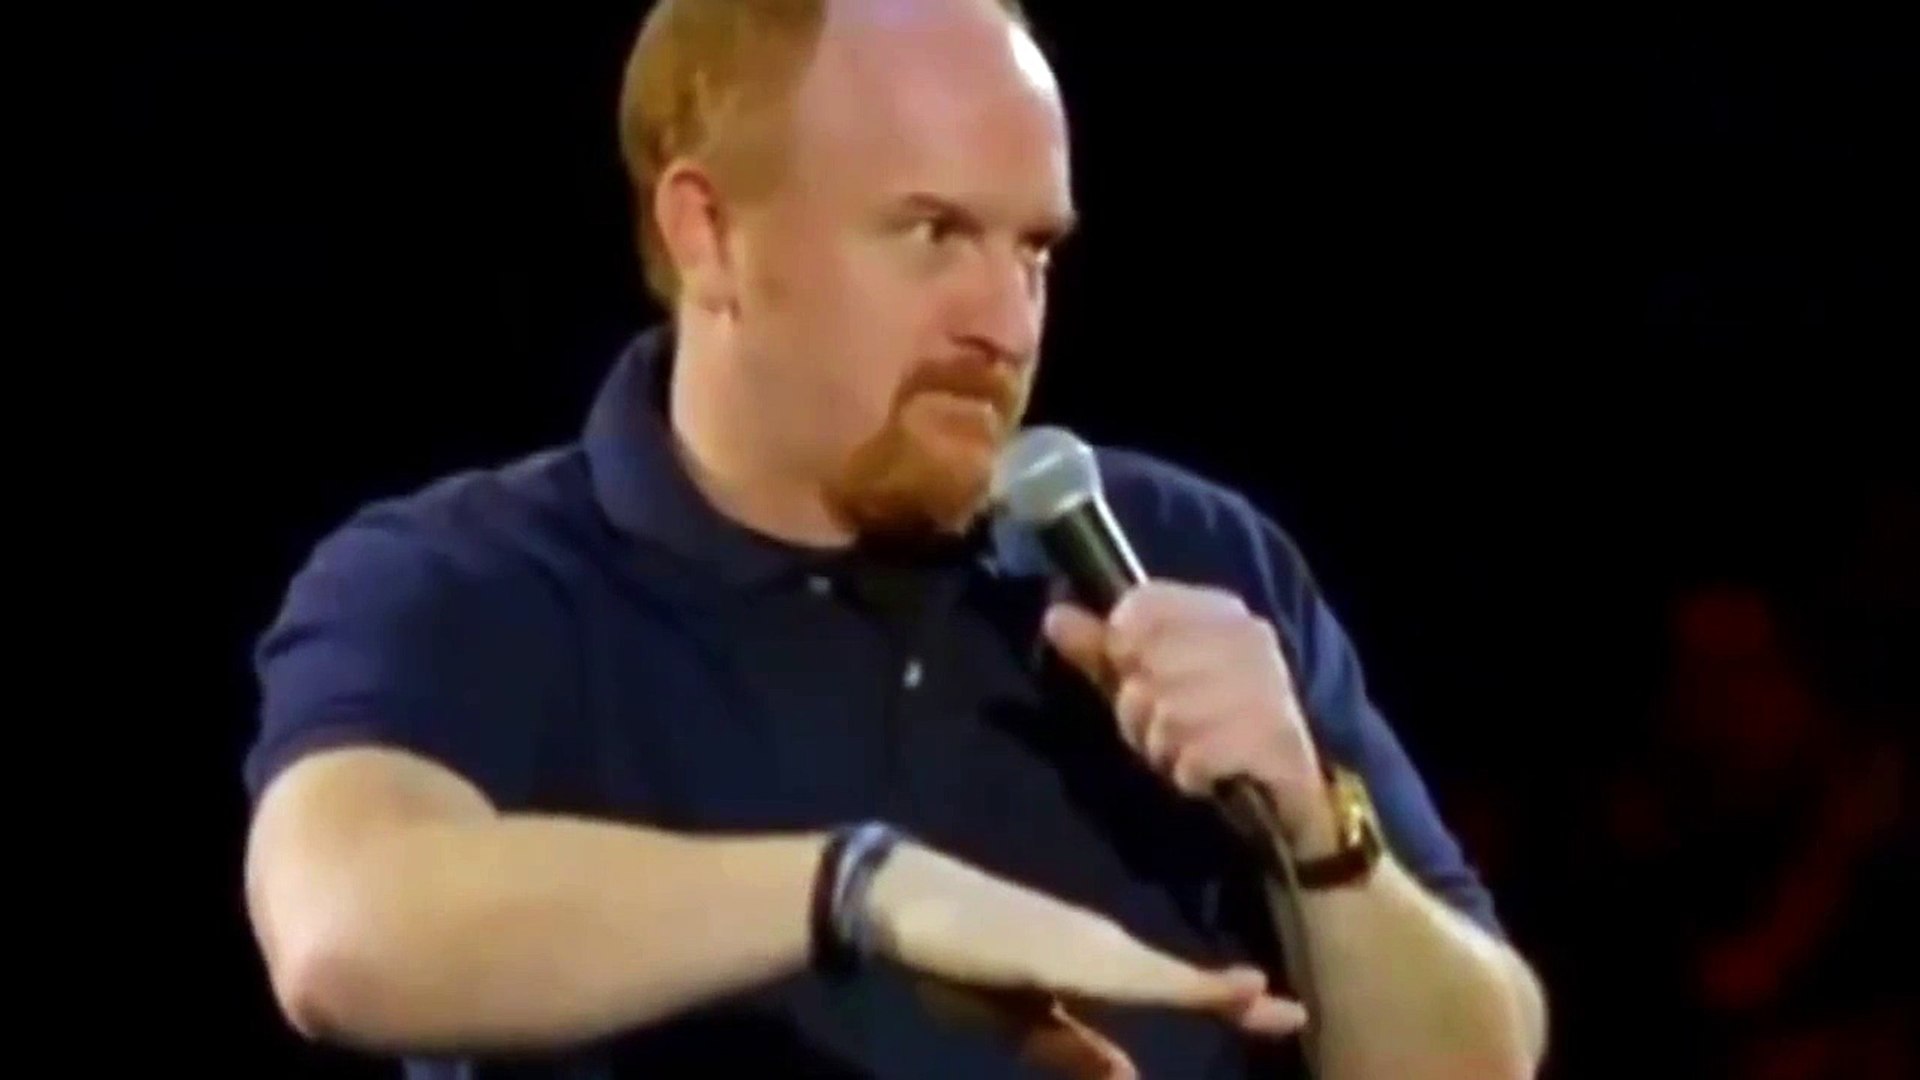 Louis C.K.: Sorry, Where to Stream and Watch